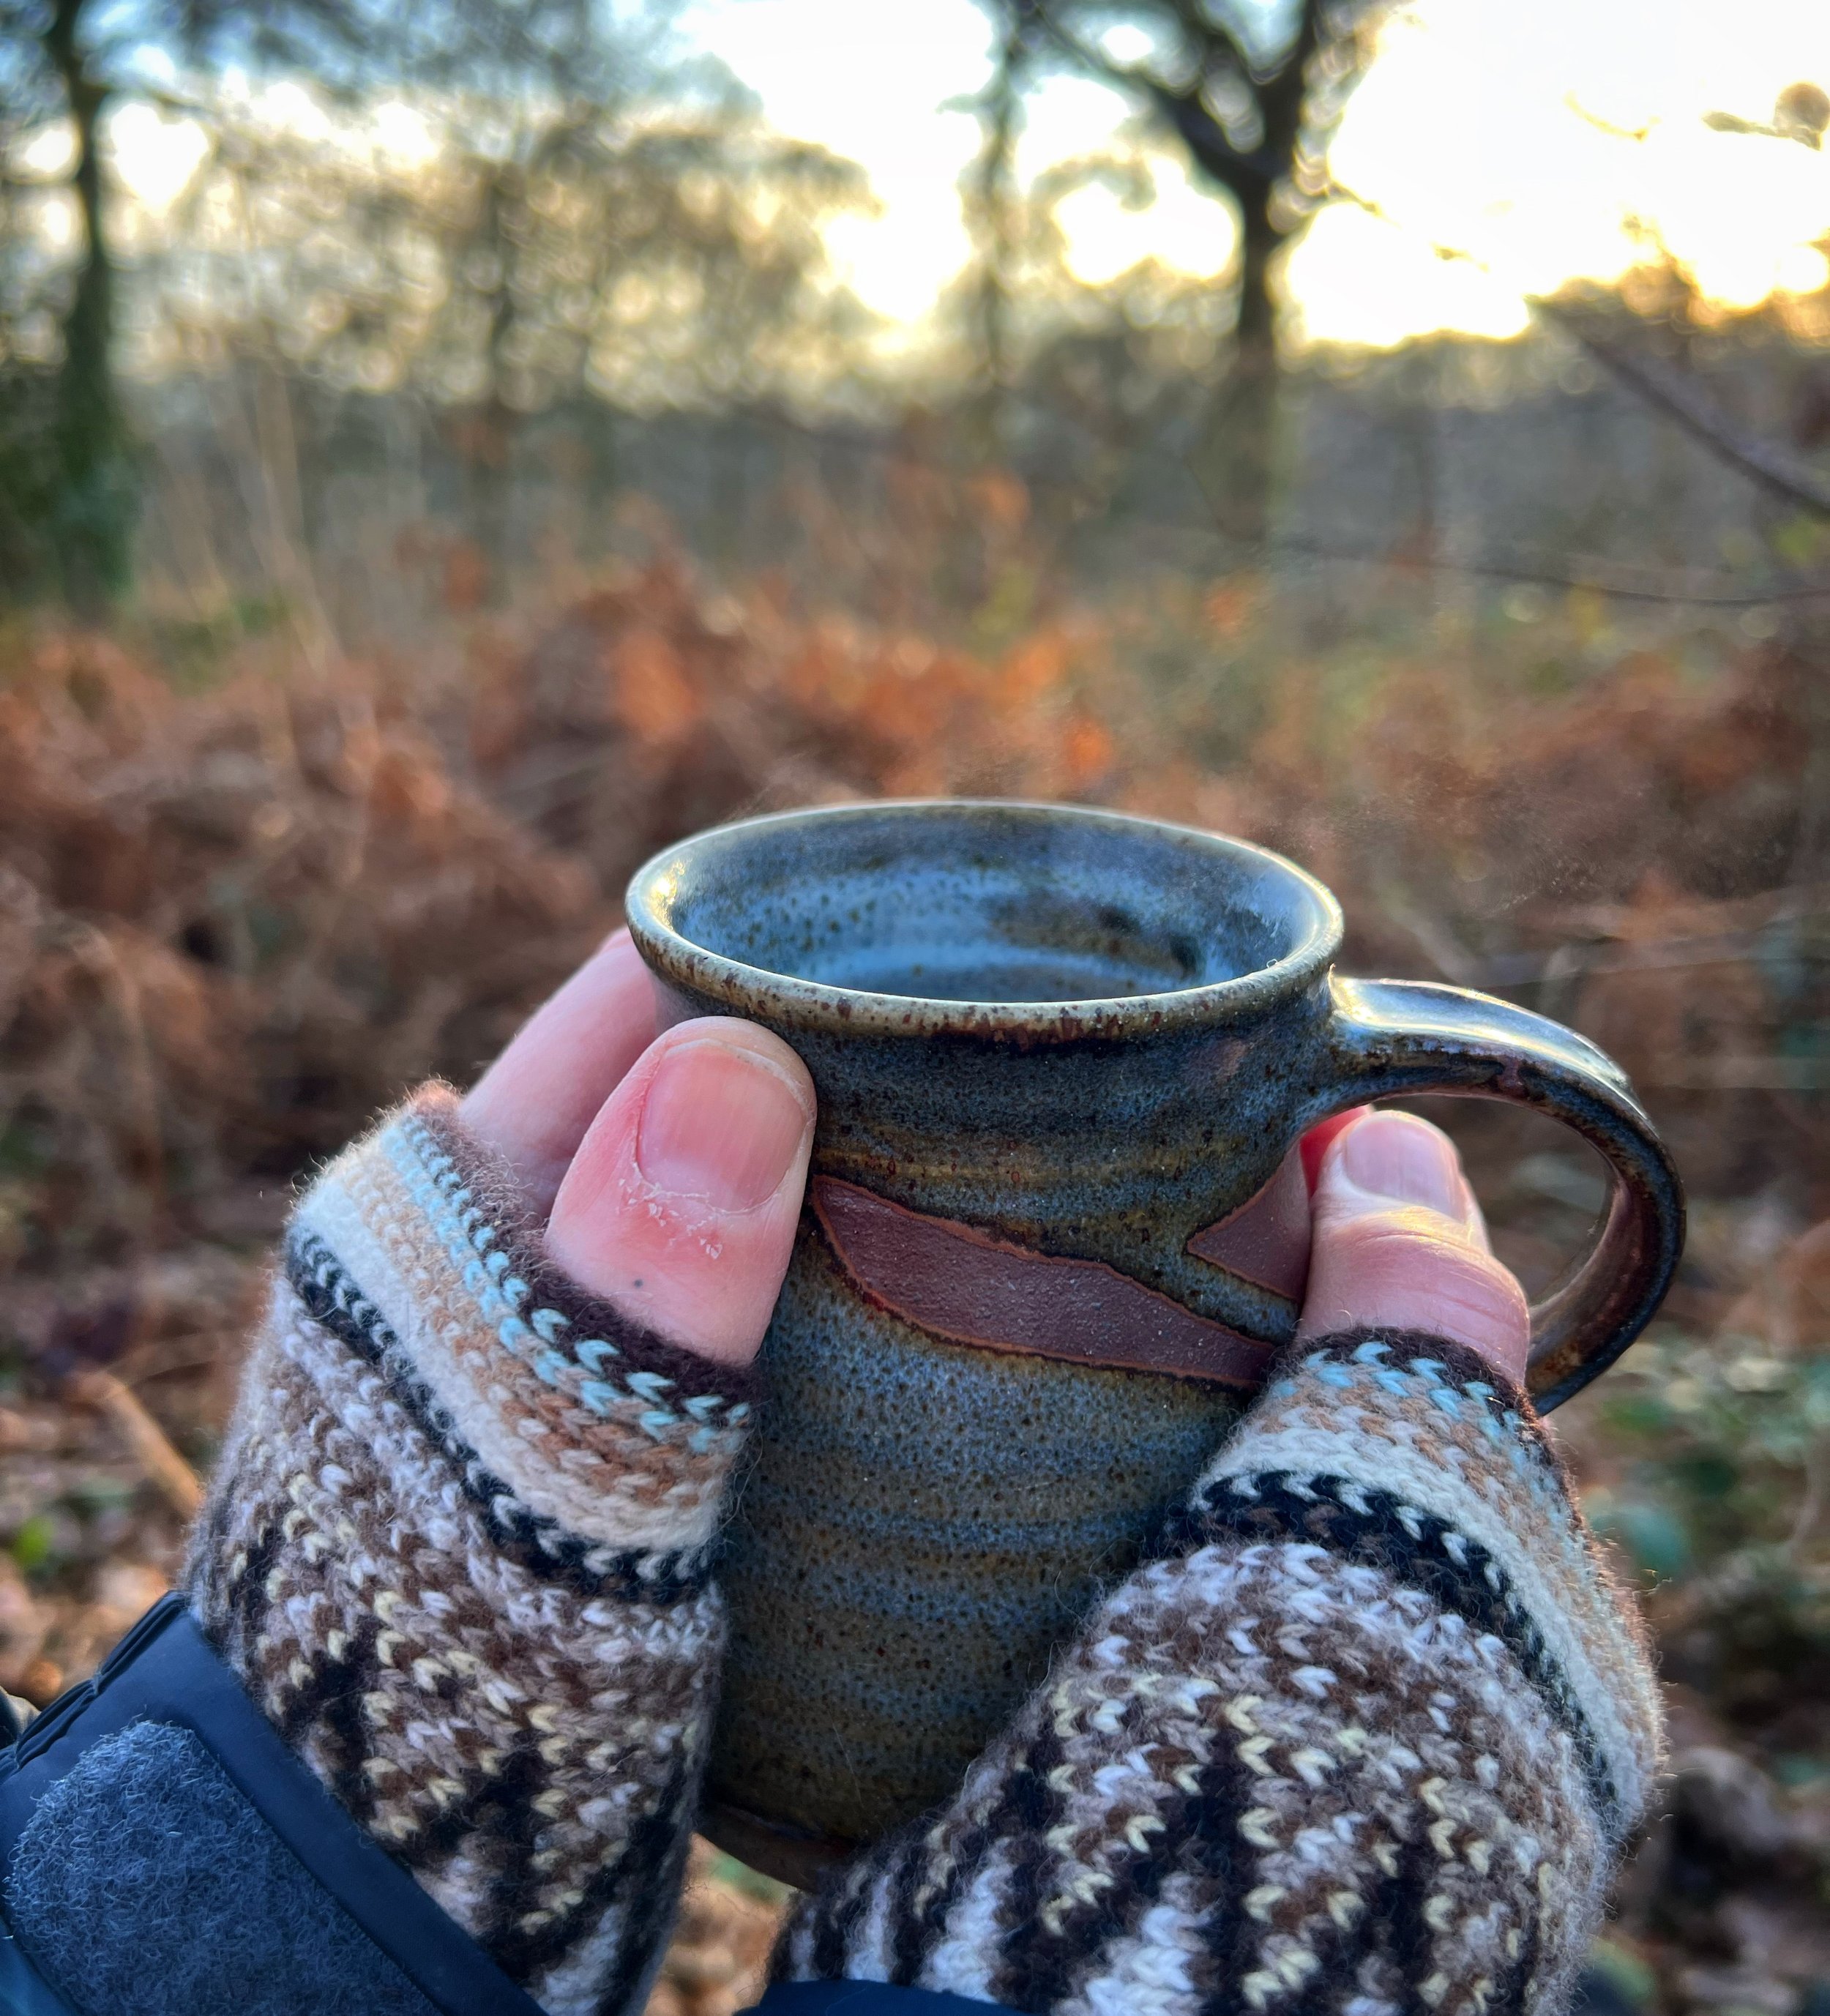 Drinking ceremonial Cacao in the woods